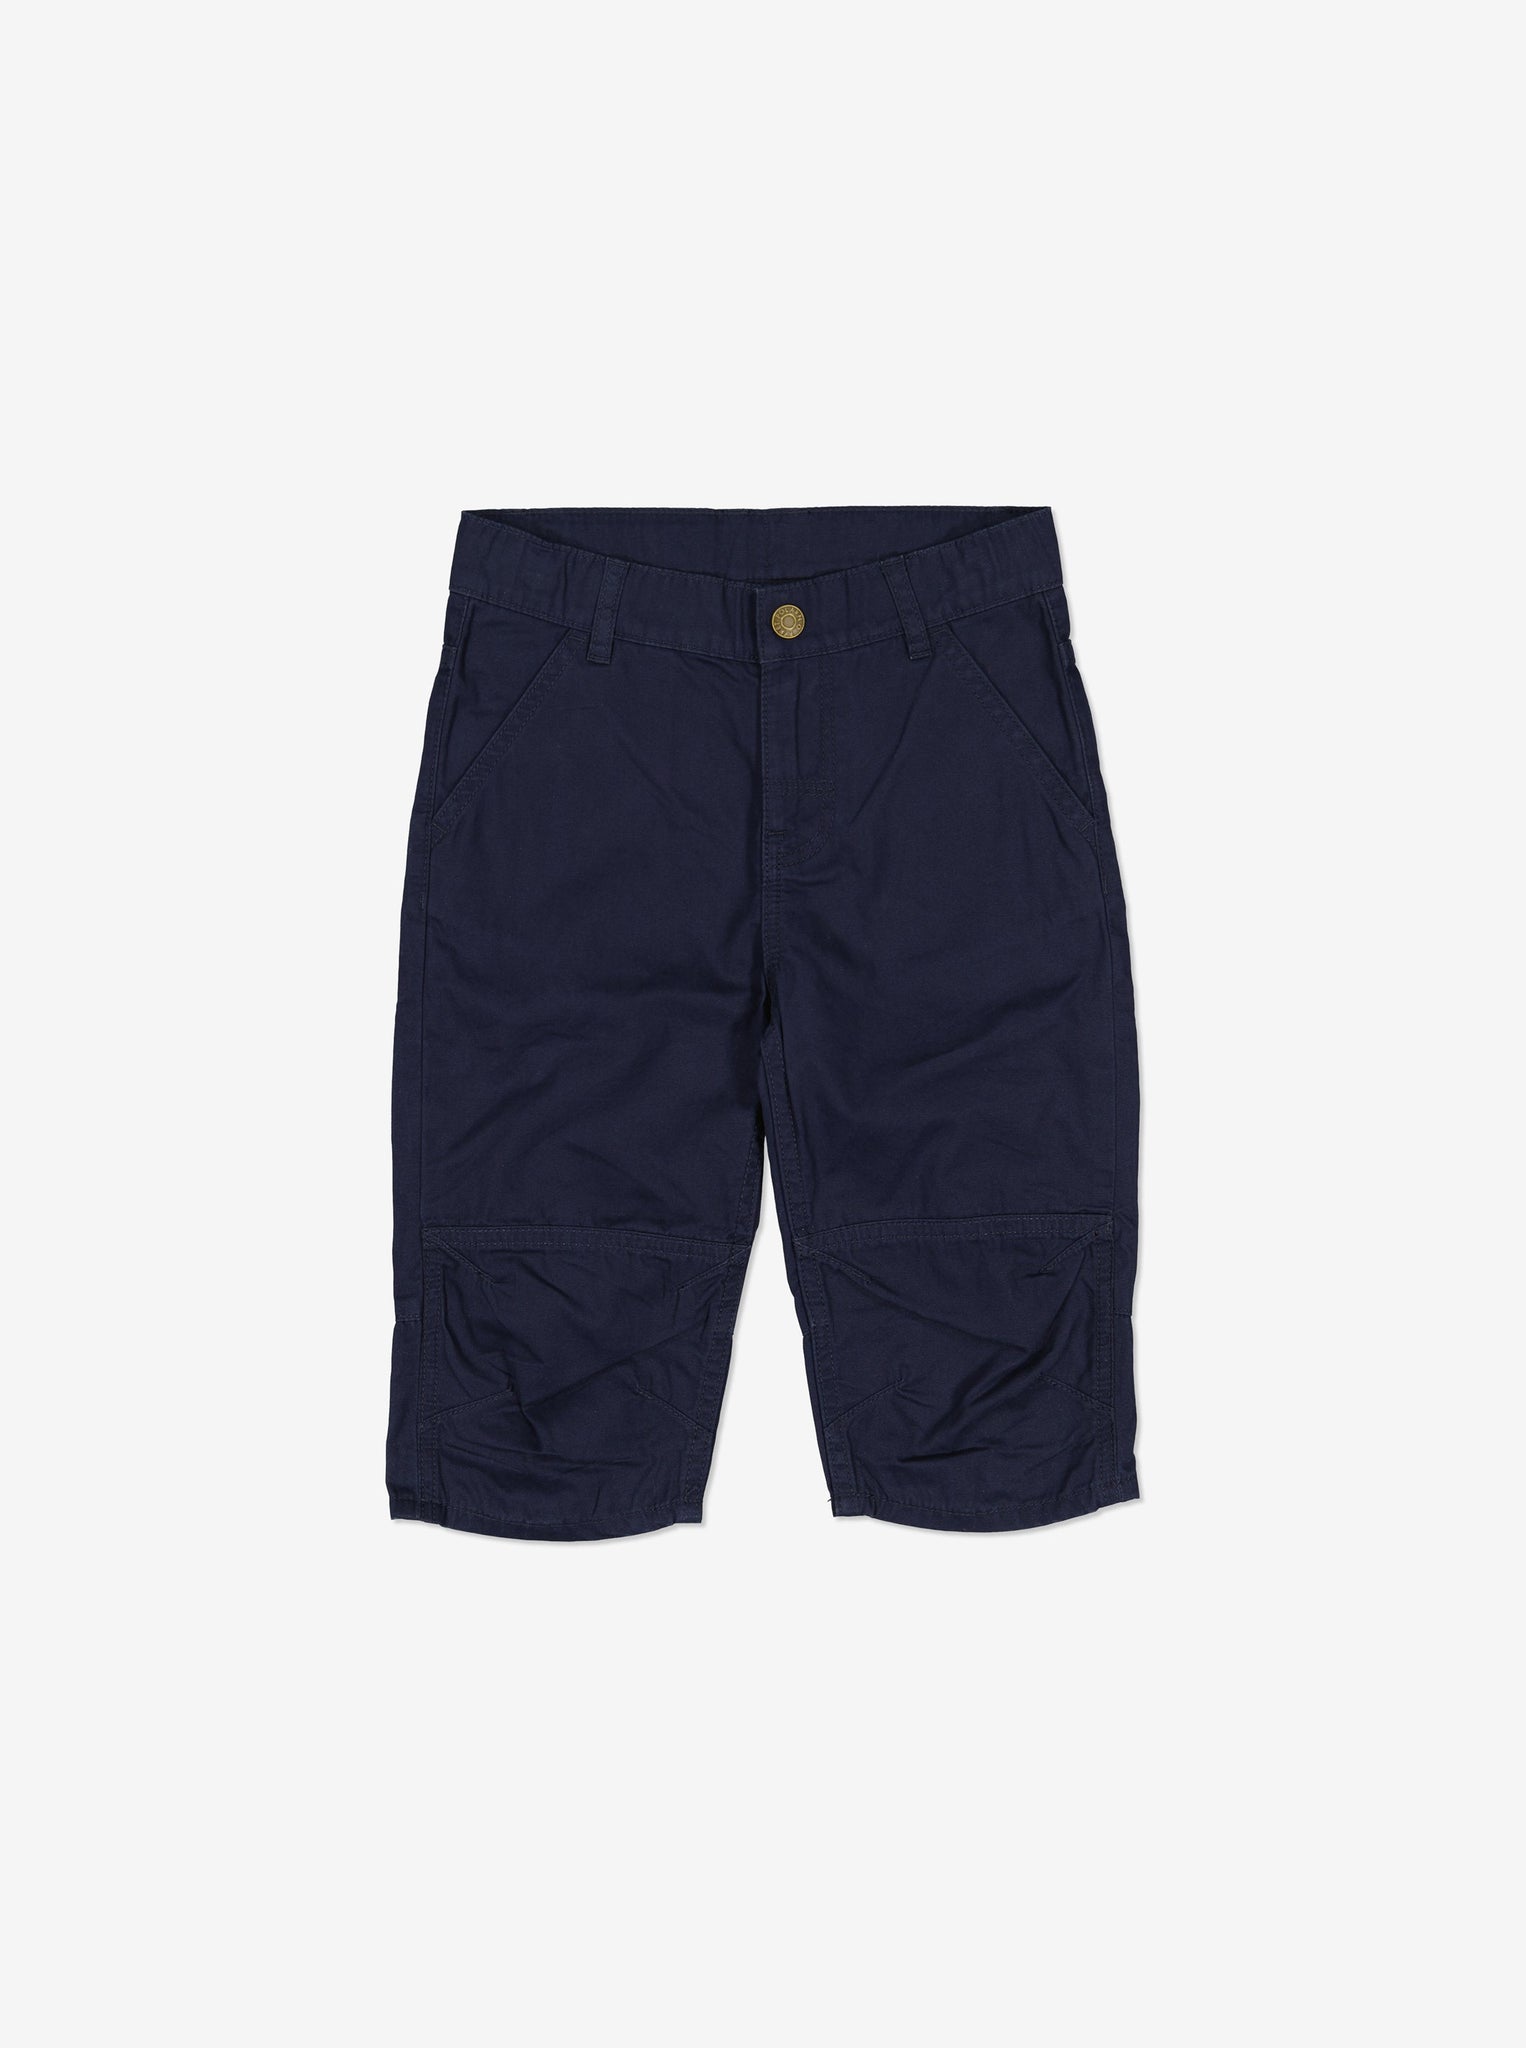  Navy Chino Kids Shorts from Polarn O. Pyret Kidswear. Made using sustainable materials.